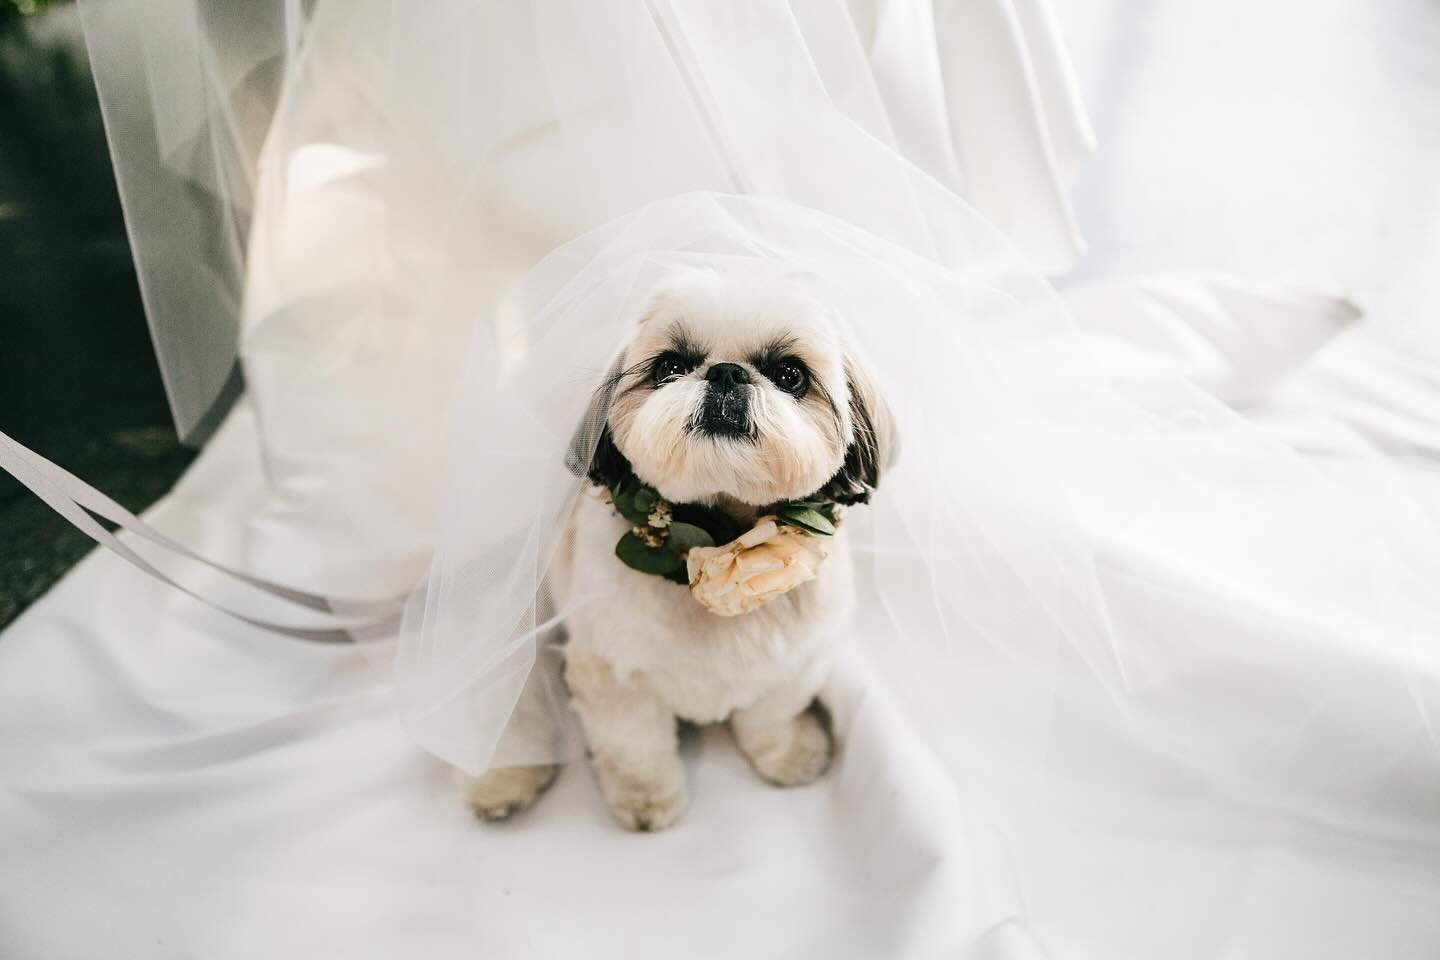 Want to know how to incorporate your pet buddy into your wedding? Want to see cute pics of pups? We&rsquo;ve got you covered on the blog today! Link in bio! 

Photo courtesy: @chazcruz 
Superstar: @marshthepup